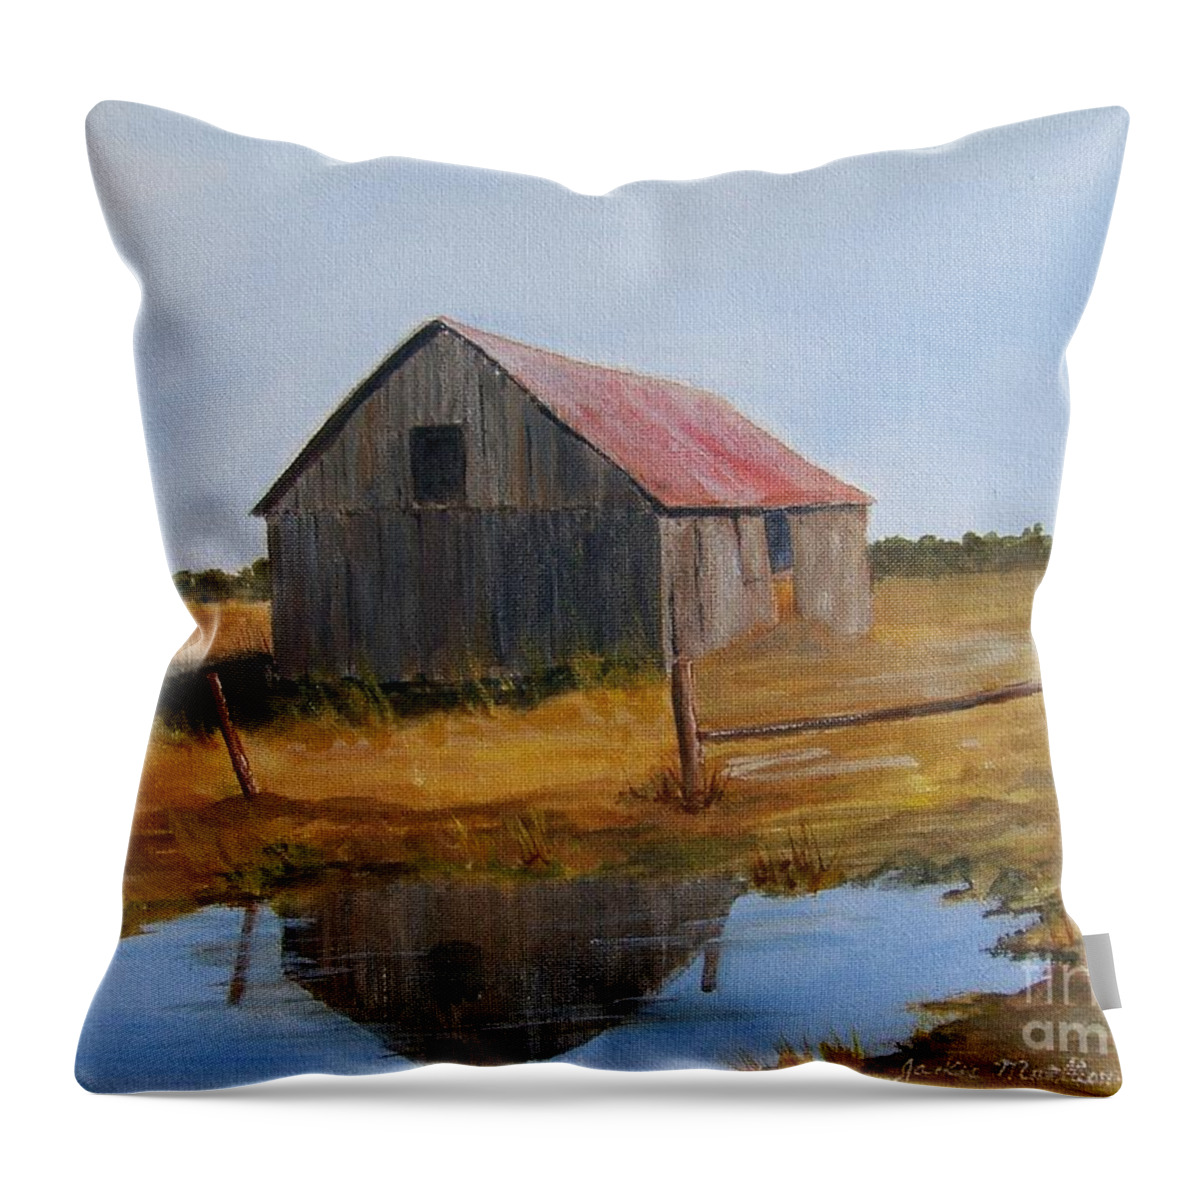 Barn Throw Pillow featuring the painting Fields Of Gold by Jackie Mueller-Jones